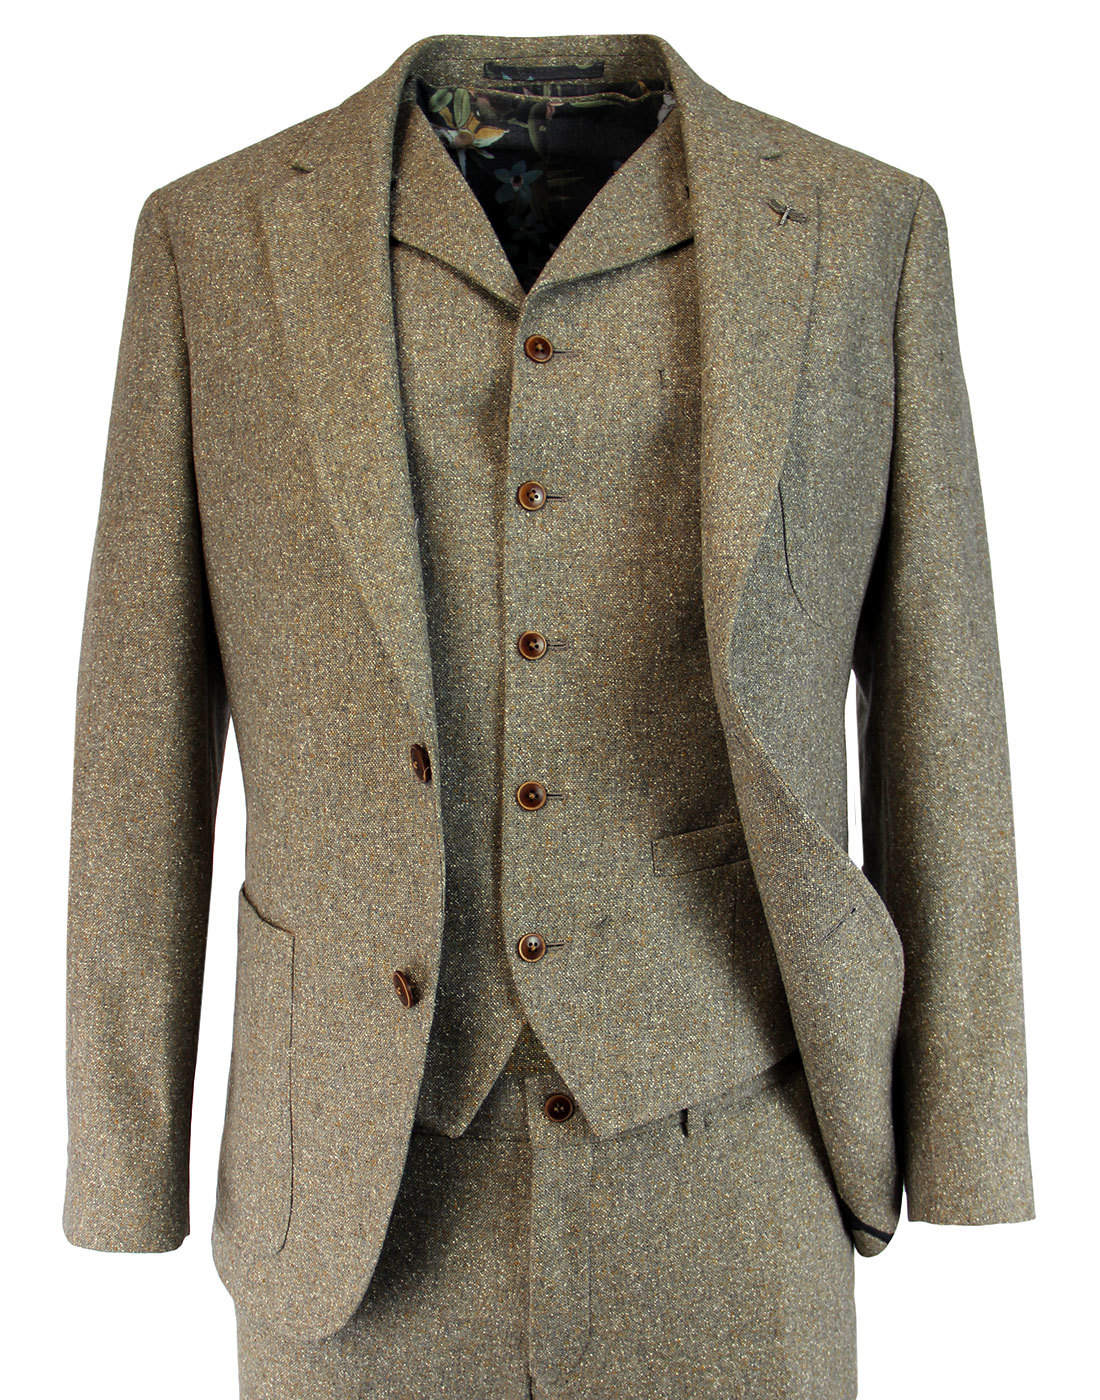 Gibson London Retro 60s Mod 3 Piece Suit in Sand Donegal.